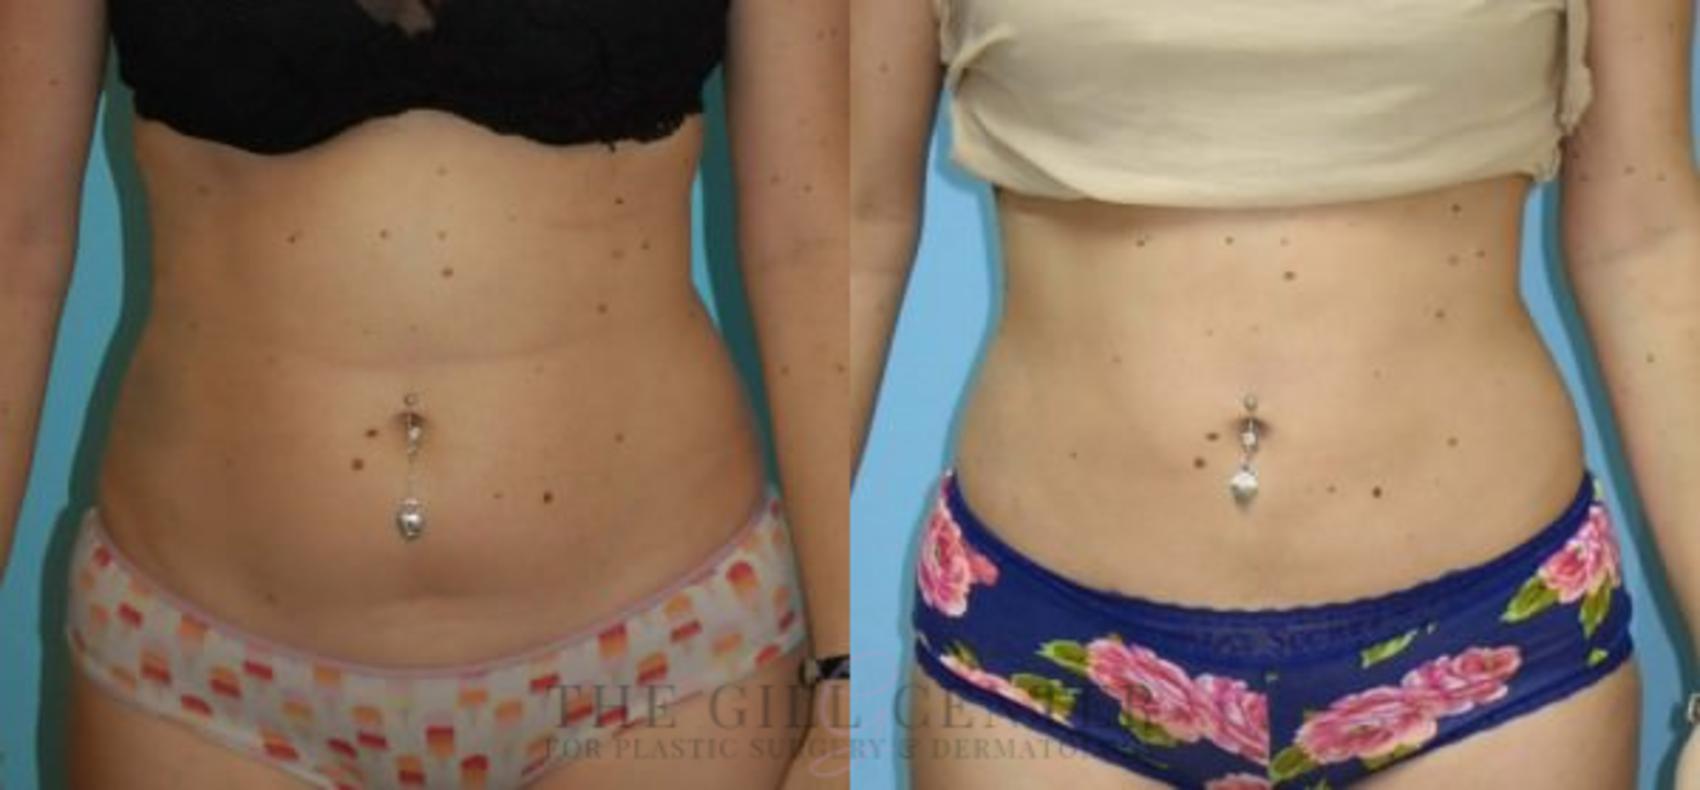 Liposuction Case 156 Before & After Front | The Woodlands, TX | The Gill Center for Plastic Surgery and Dermatology